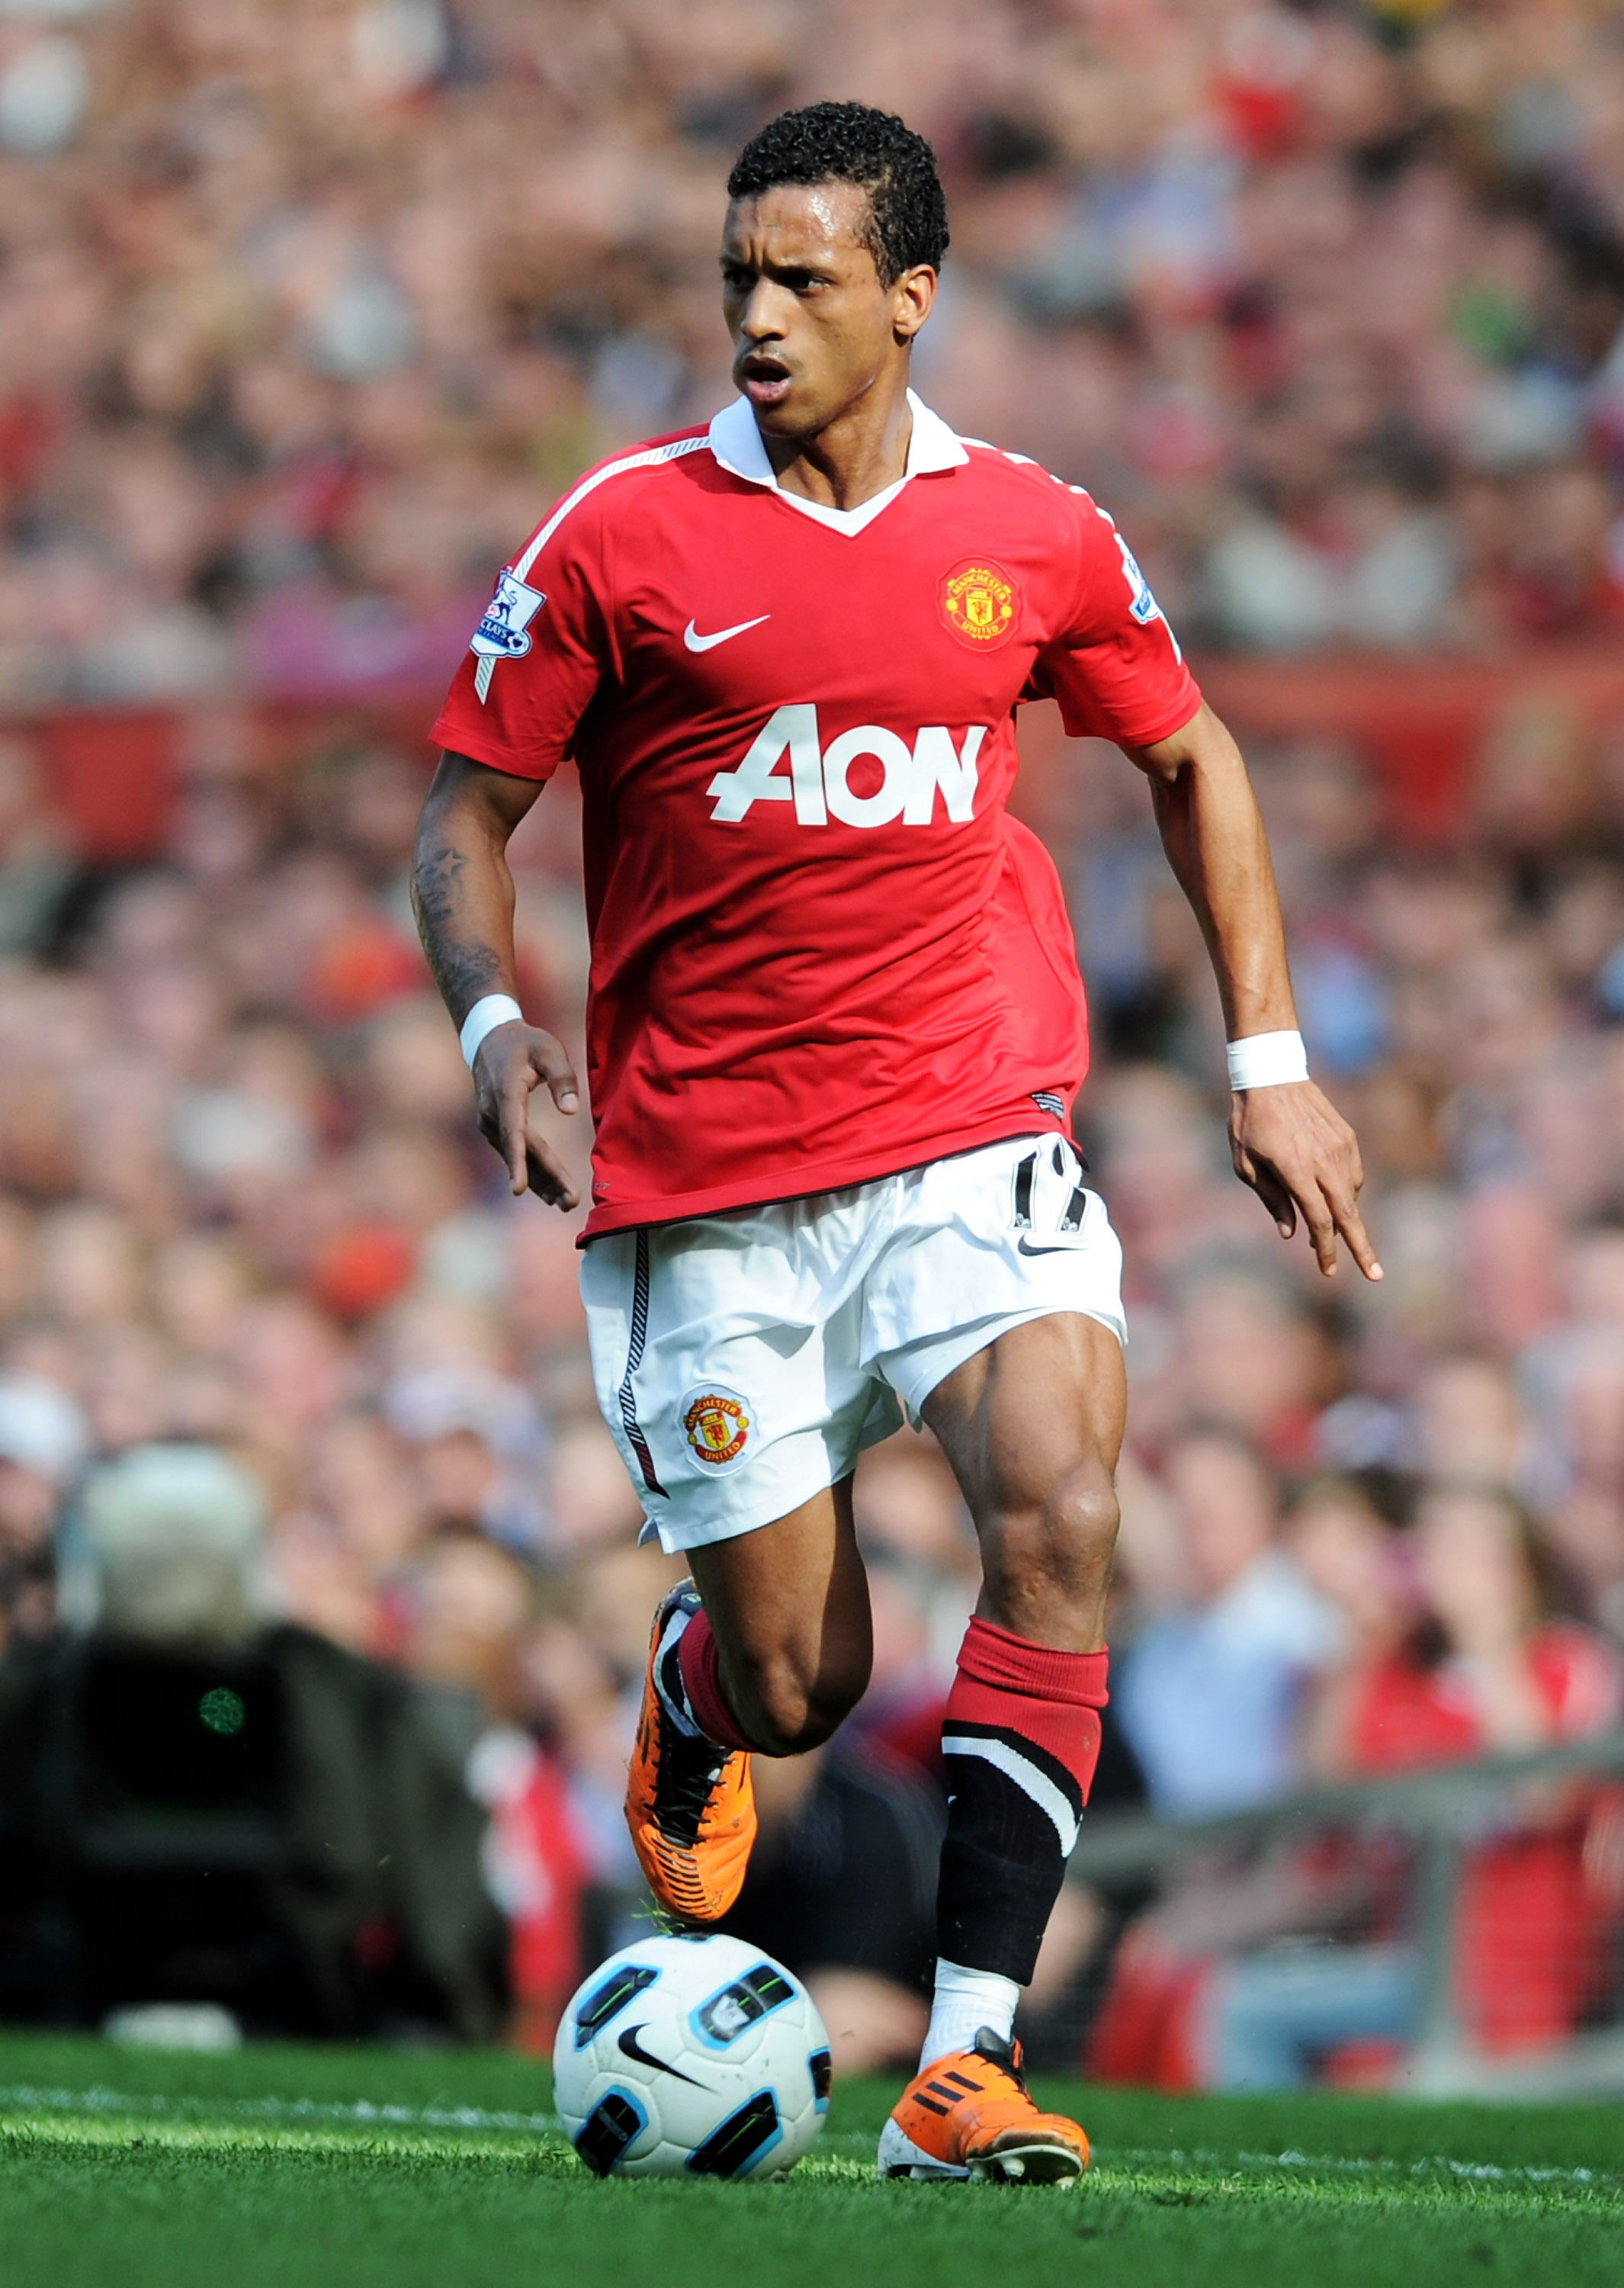 MANCHESTER, ENGLAND - APRIL 09:  Nani of Manchester United in action during the Barclays Premier League match between Manchester United and Fulham at Old Trafford on April 9, 2011 in Manchester, England.  (Photo by Michael Regan/Getty Images)